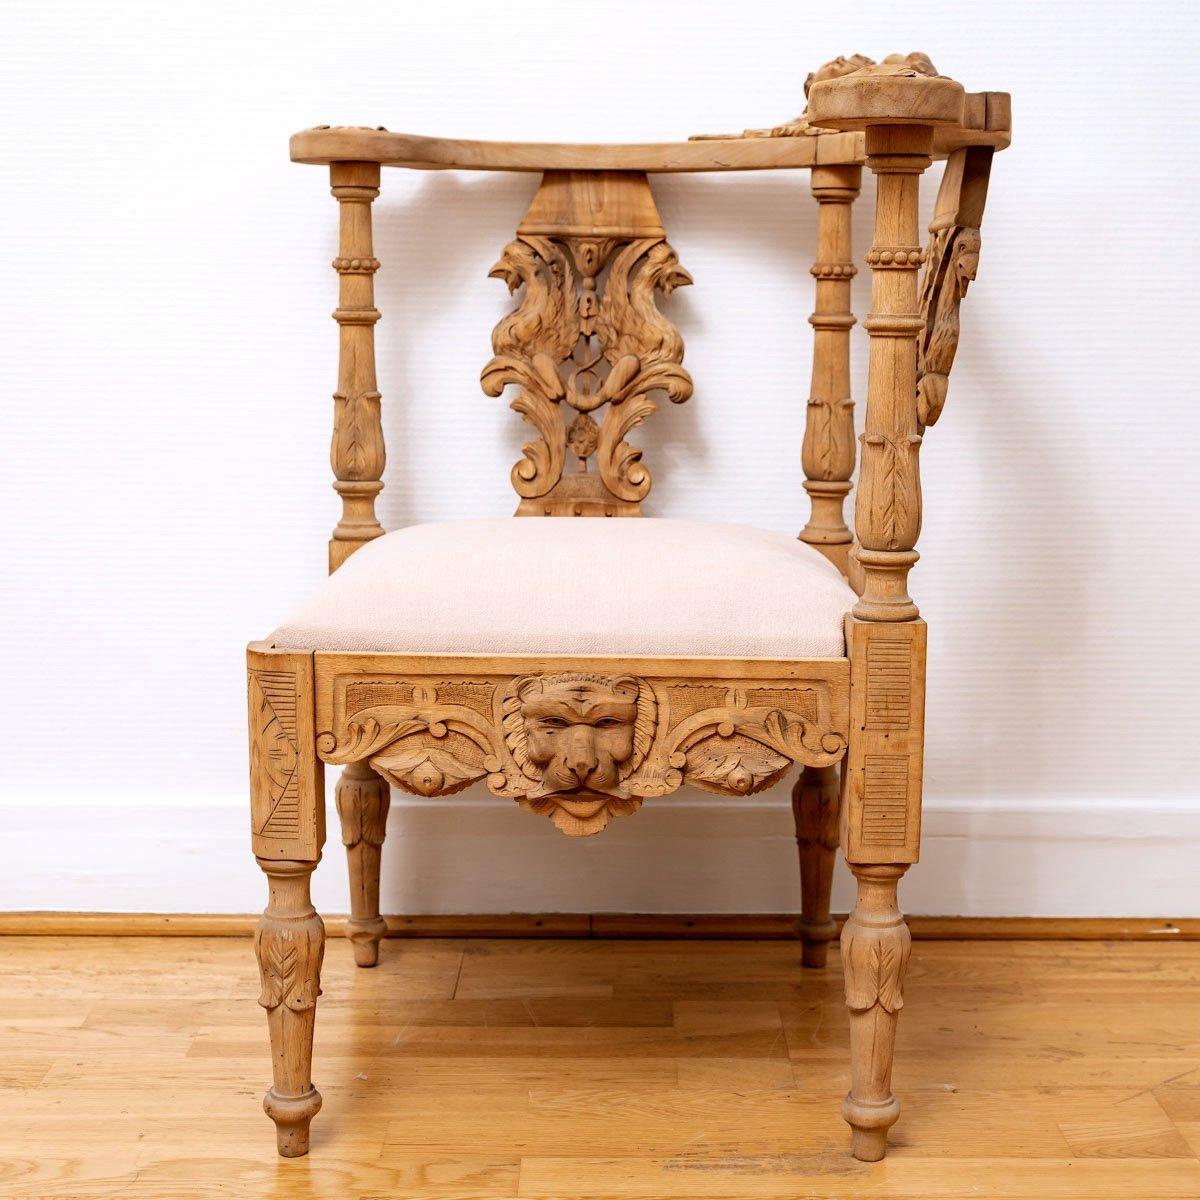 Charming corner armchair in solid walnut.
This beautiful piece of furniture, a unique part of a complete living room, was made in Italy, in the region of Piedmont, whose many places still offer a testimony of the past. History has left its mark on